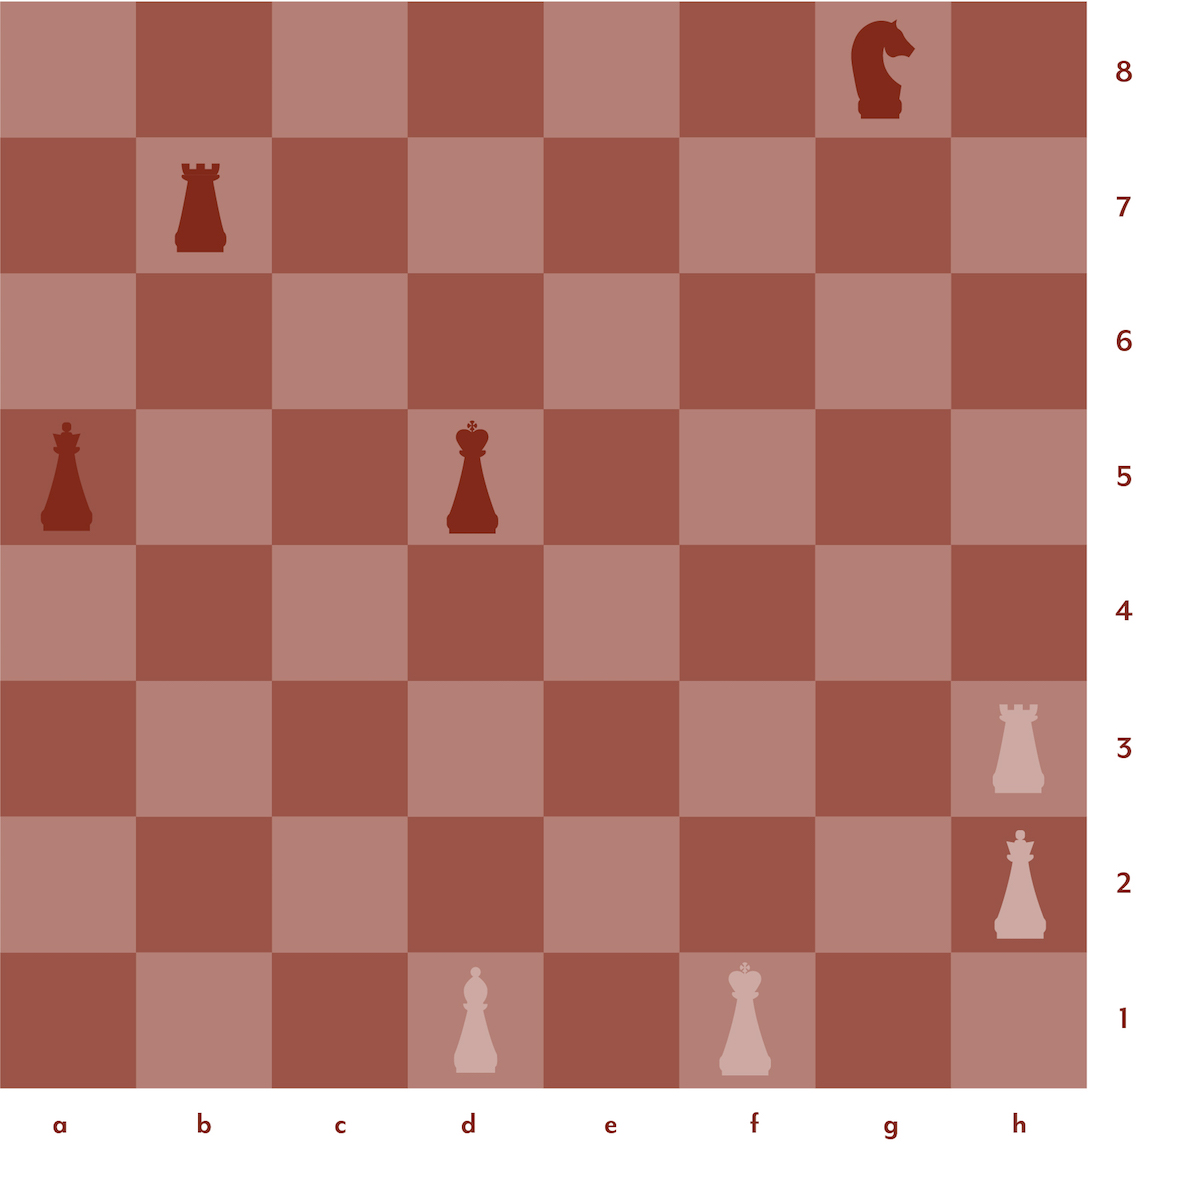 Chess 101: What Is a Skewer in Chess? Learn About 2 Types of Skewer Attacks  With Examples - 2023 - MasterClass